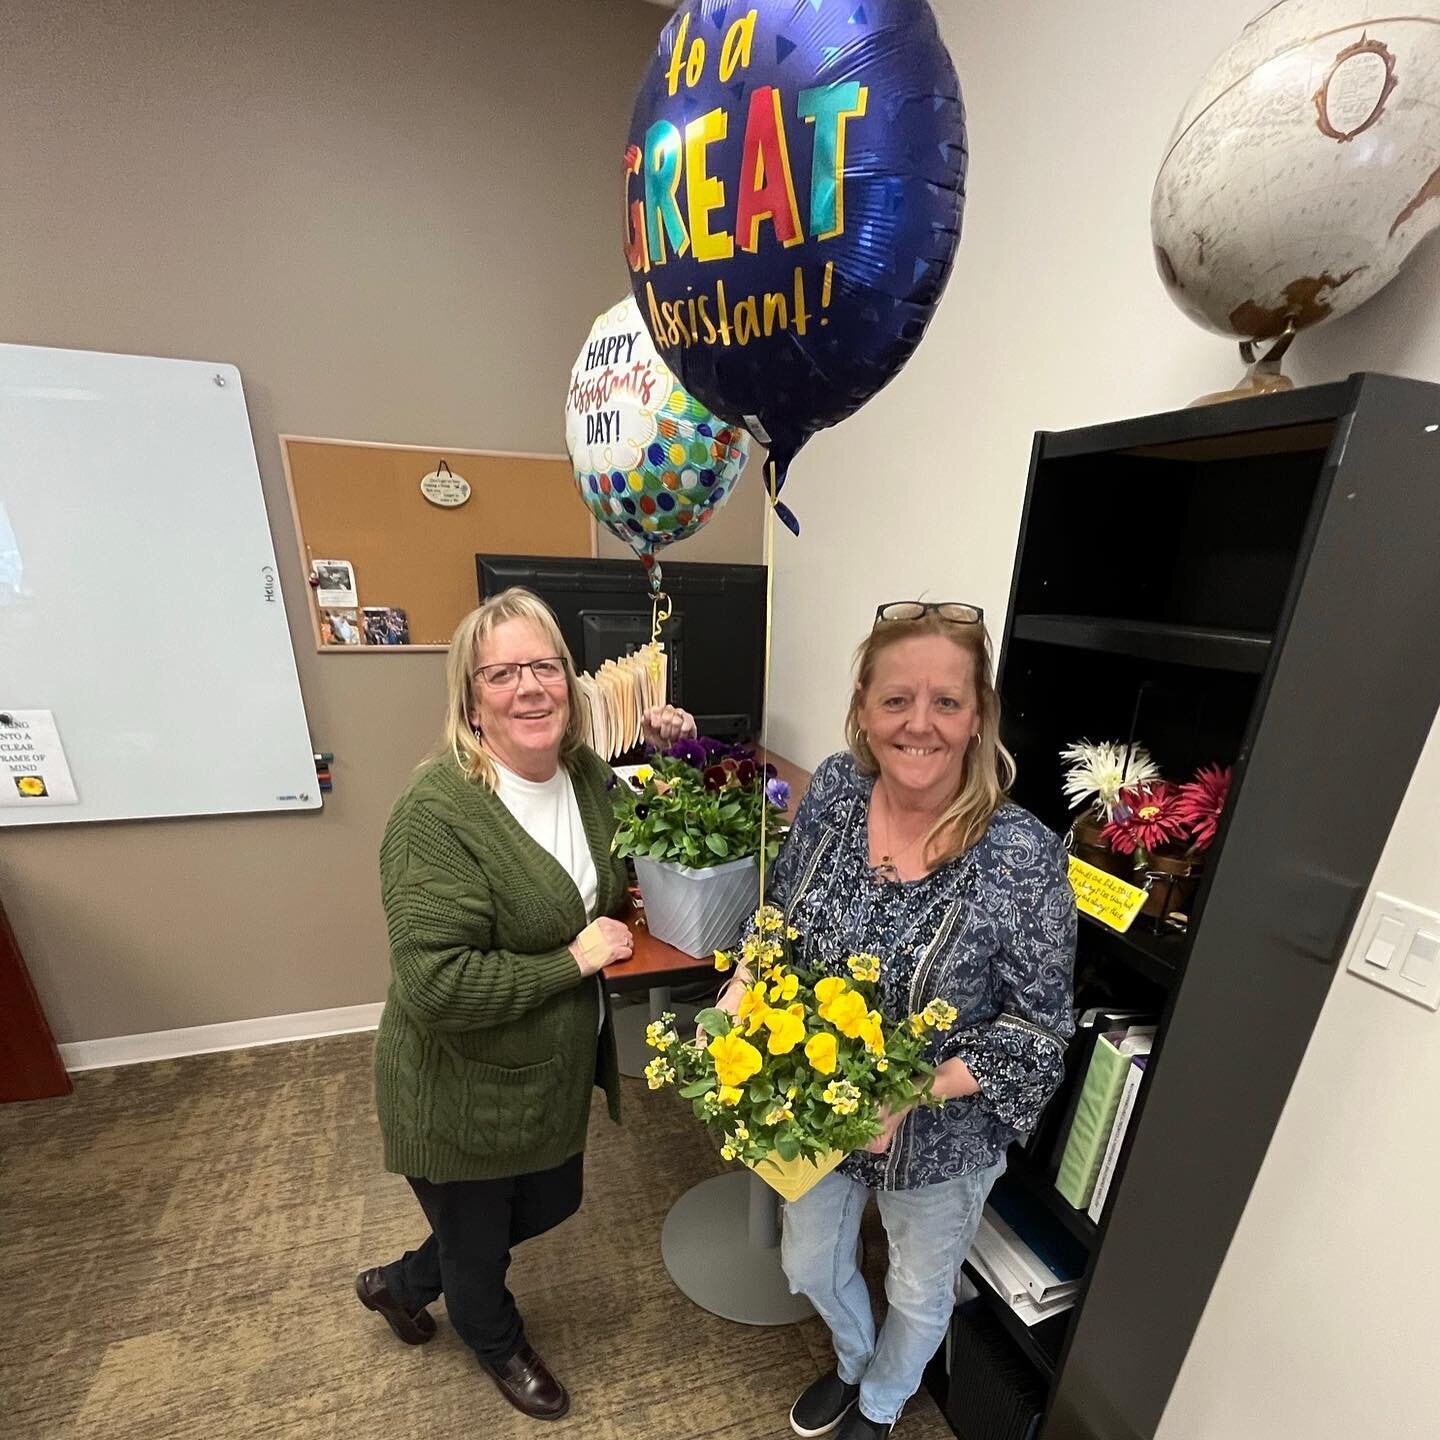 Happy Administrative Professionals Day to the hardworking and dedicated members of our team who keep everything running smoothly behind the scenes! We couldn't do it without our Office Manager and Office Engineers. Thank you for your contributions to